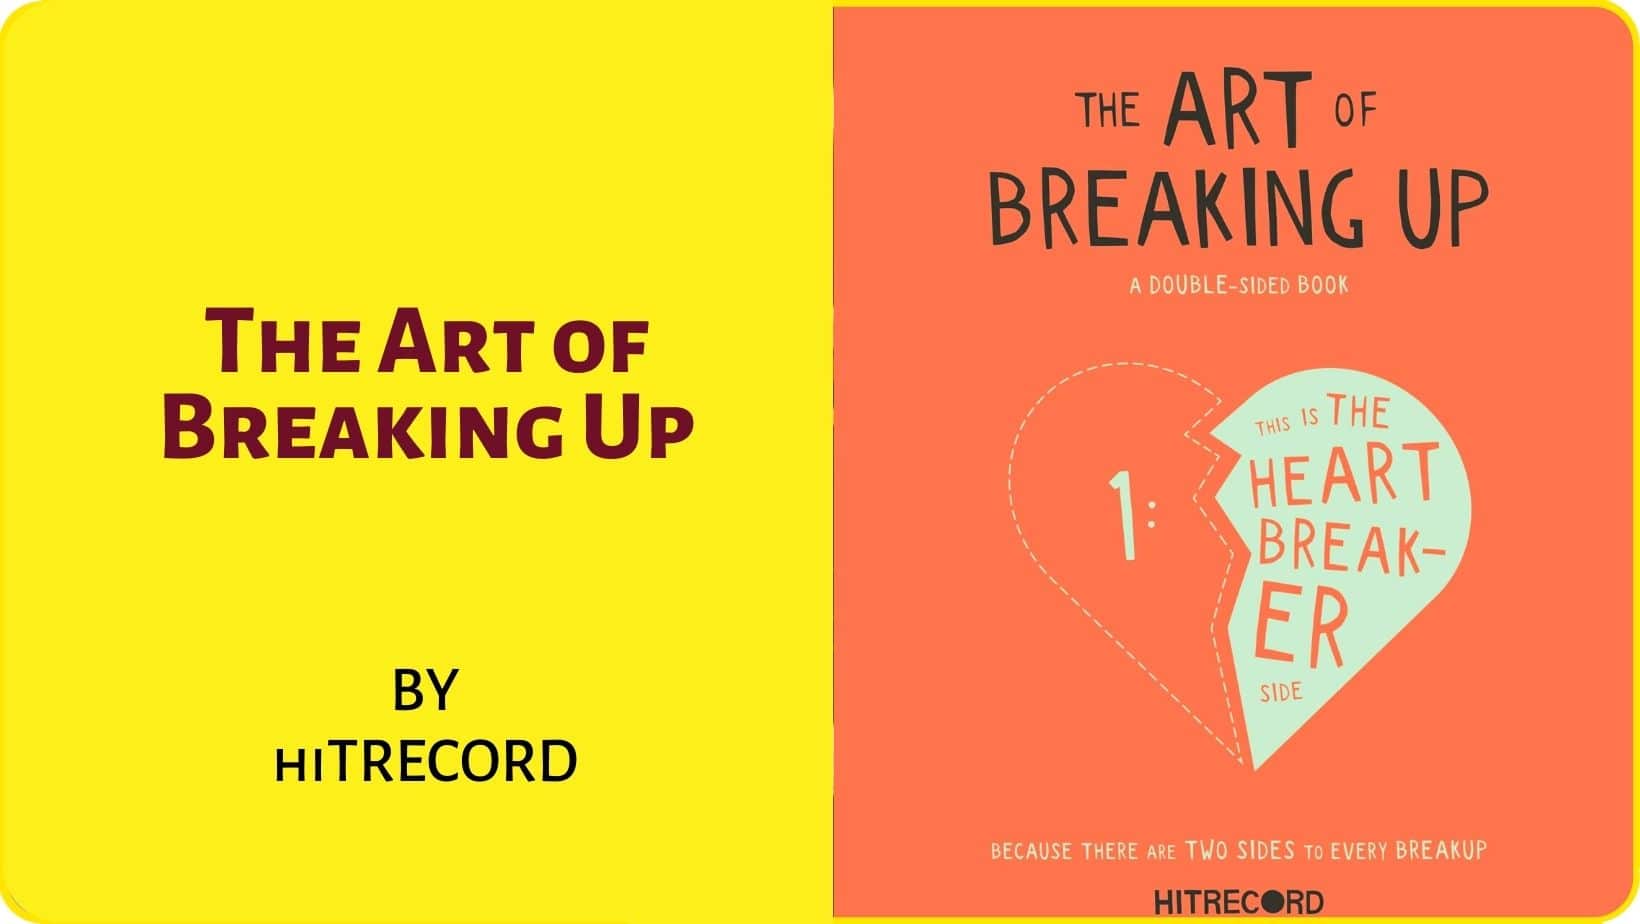 he Art of Breaking Up by hiTRECORD best meditation books